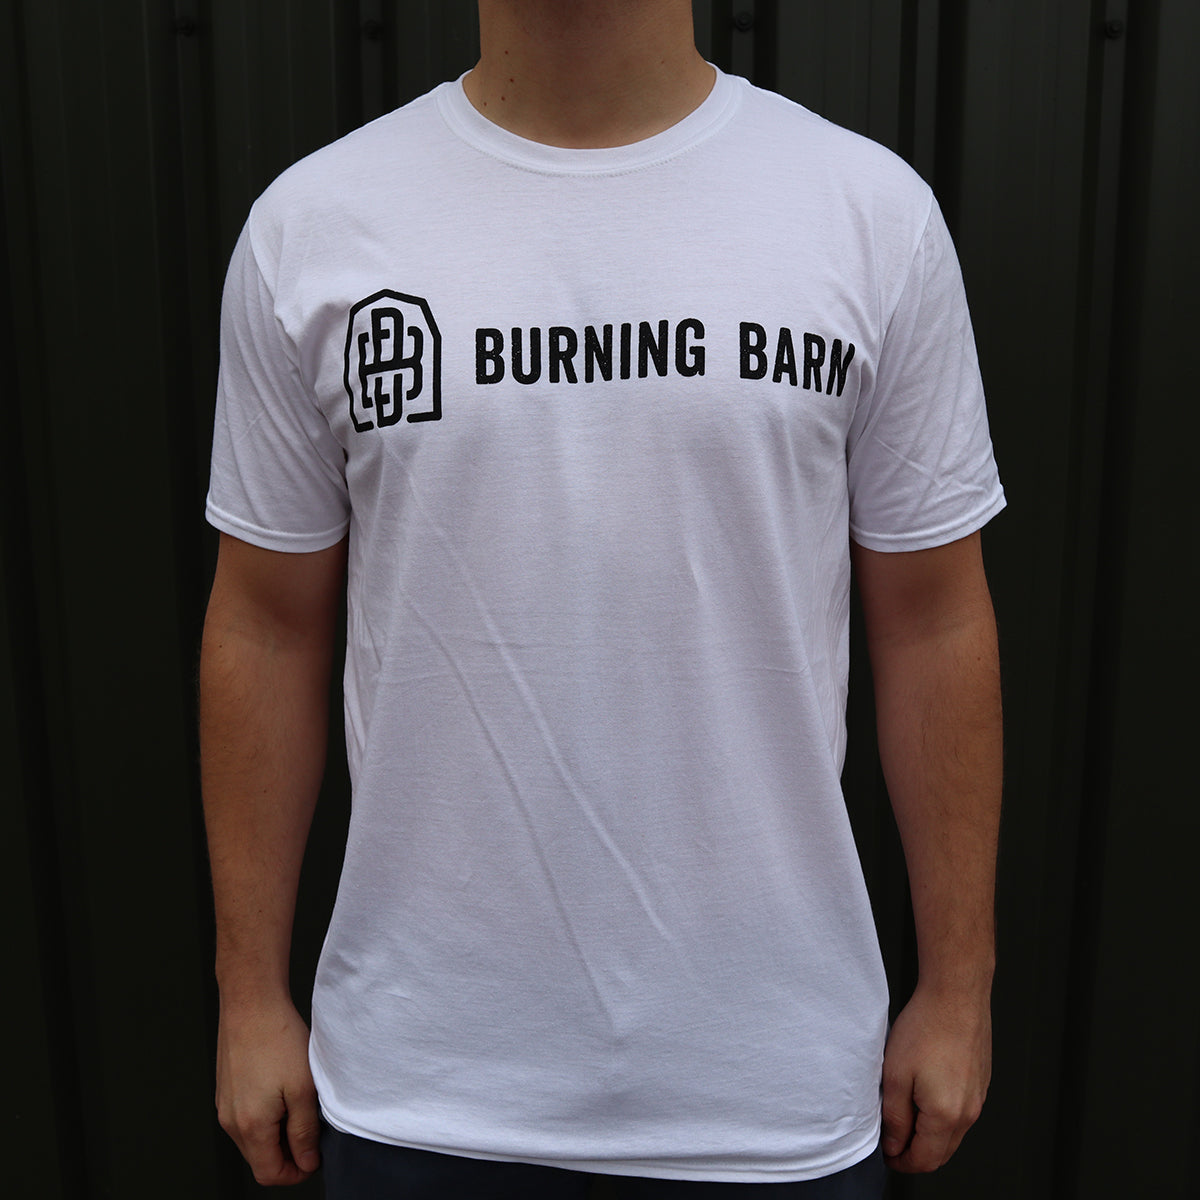 Person wearing a white t-shirt with the Burning Barn logo on it - view of the front